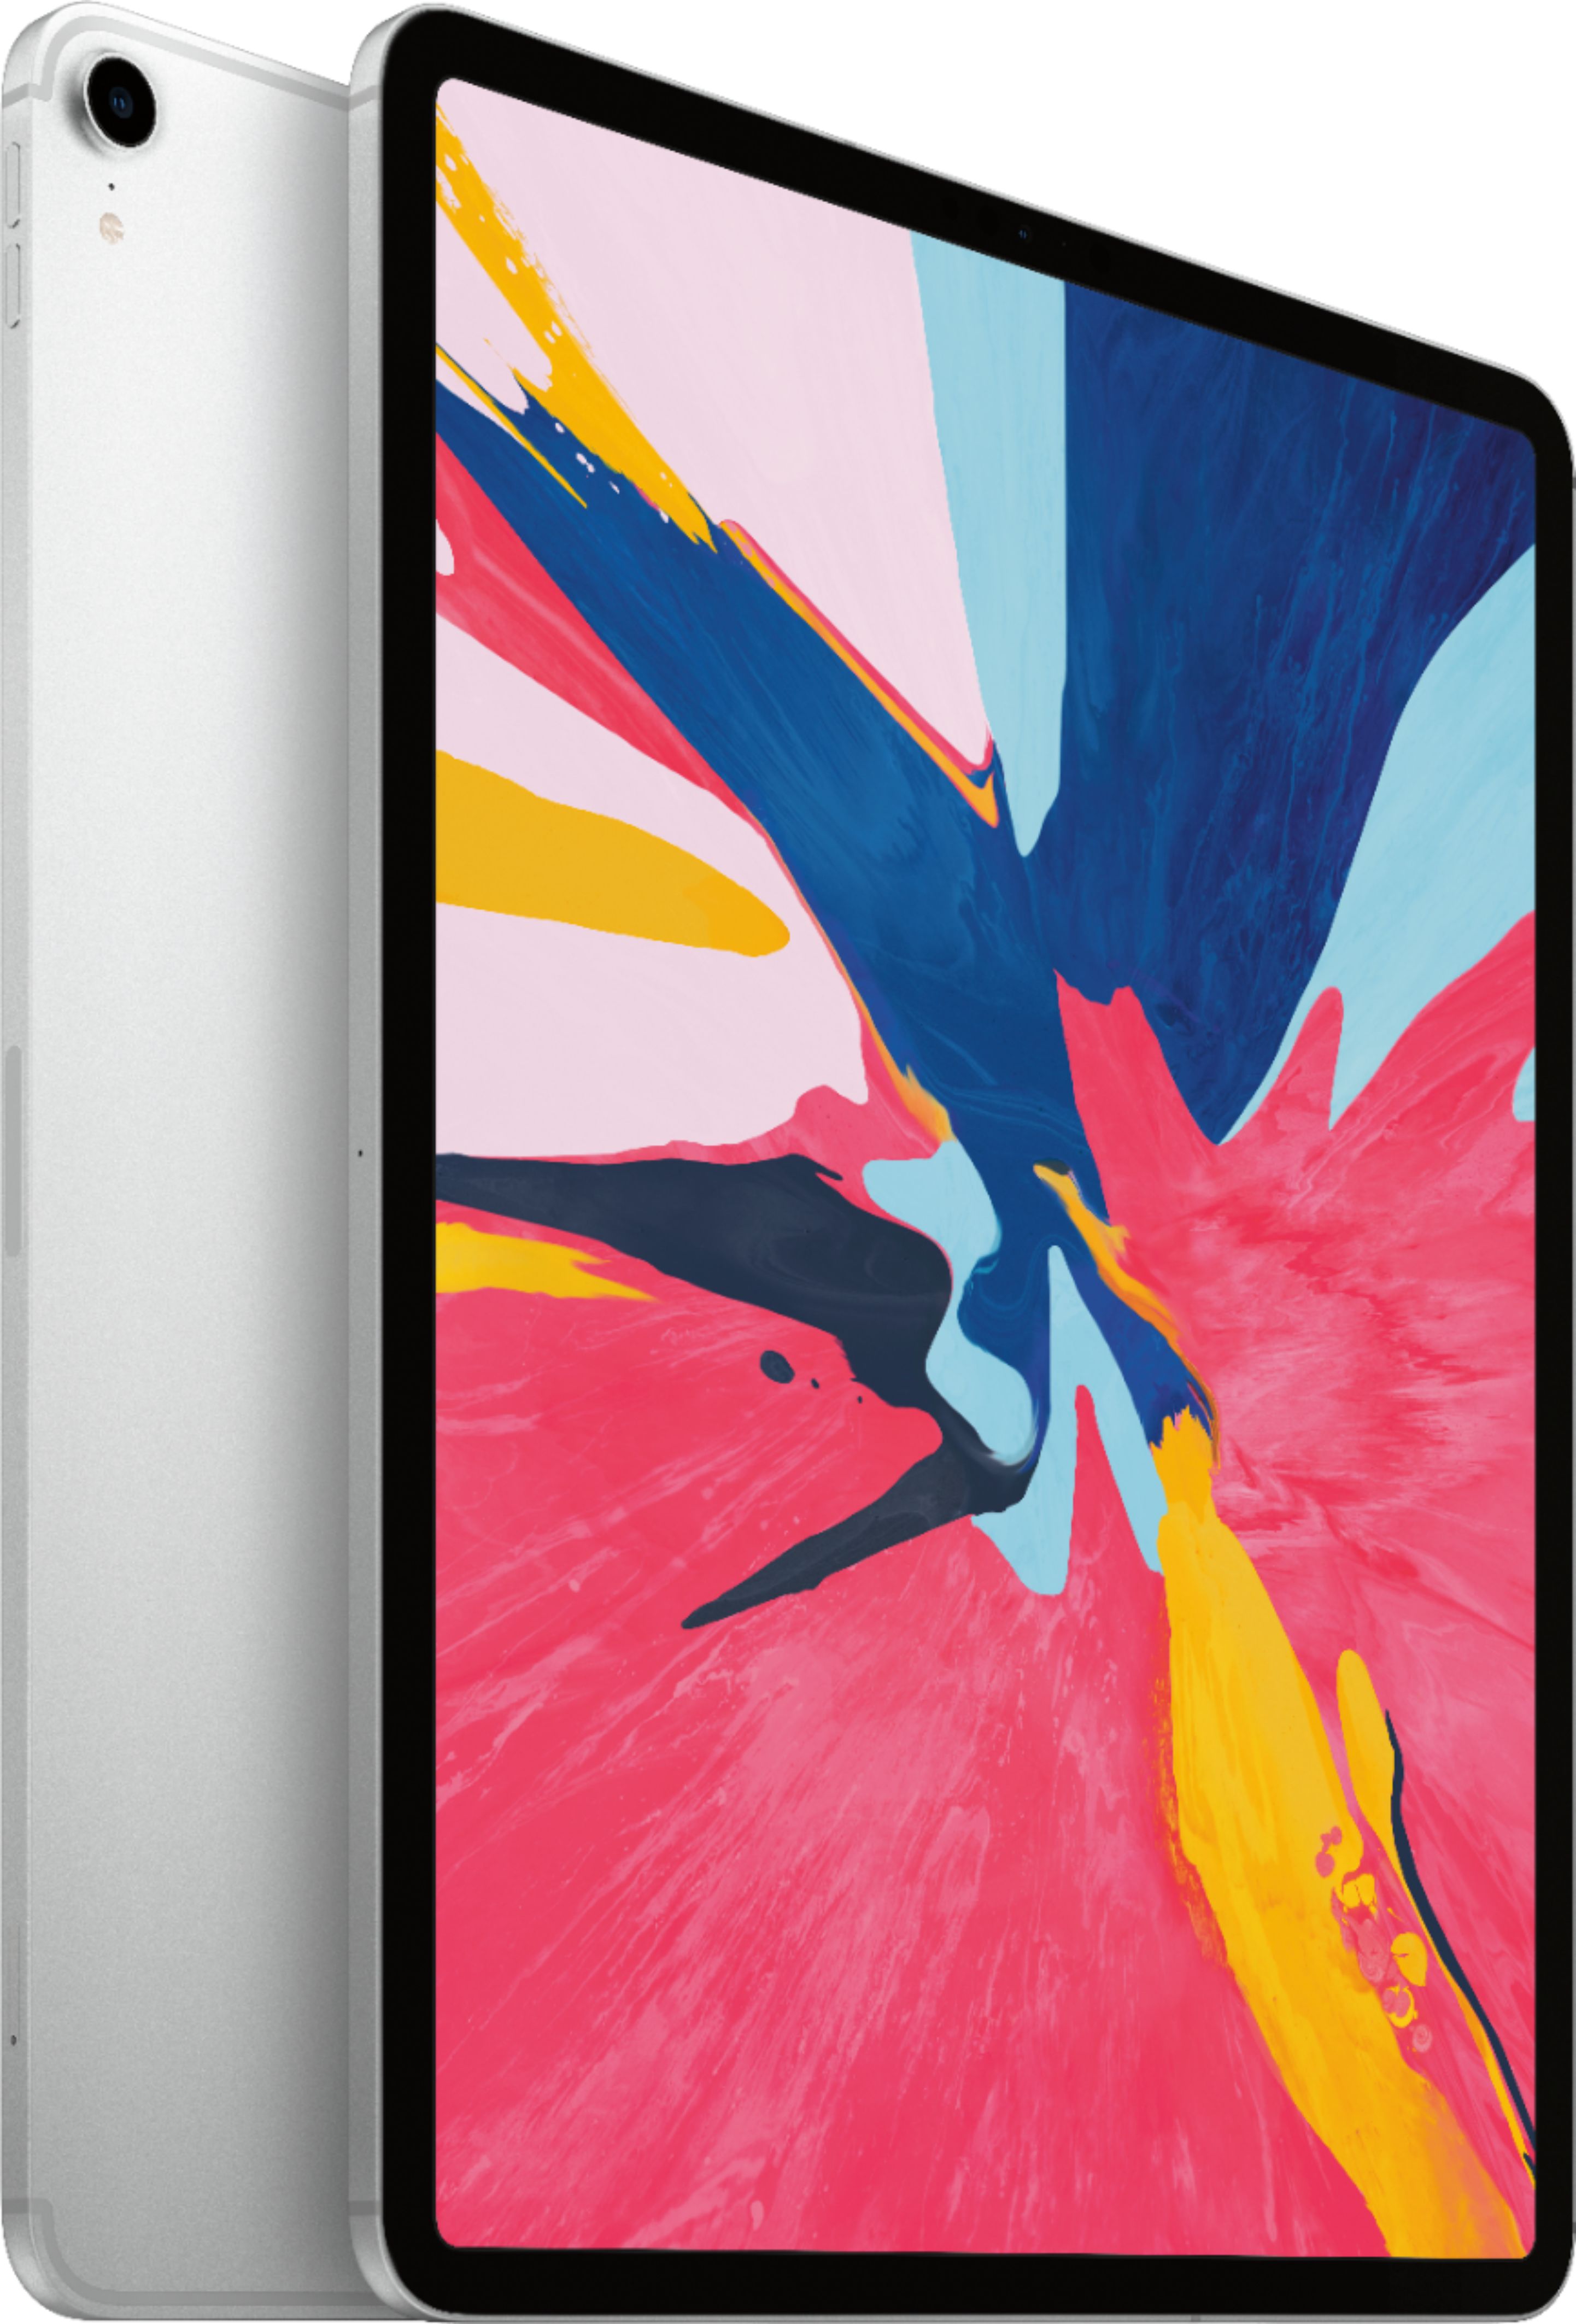 Angle View: Apple - 12.9-Inch iPad Pro (4th Generation) with Wi-Fi + Cellular - 512GB (Unlocked) - Silver